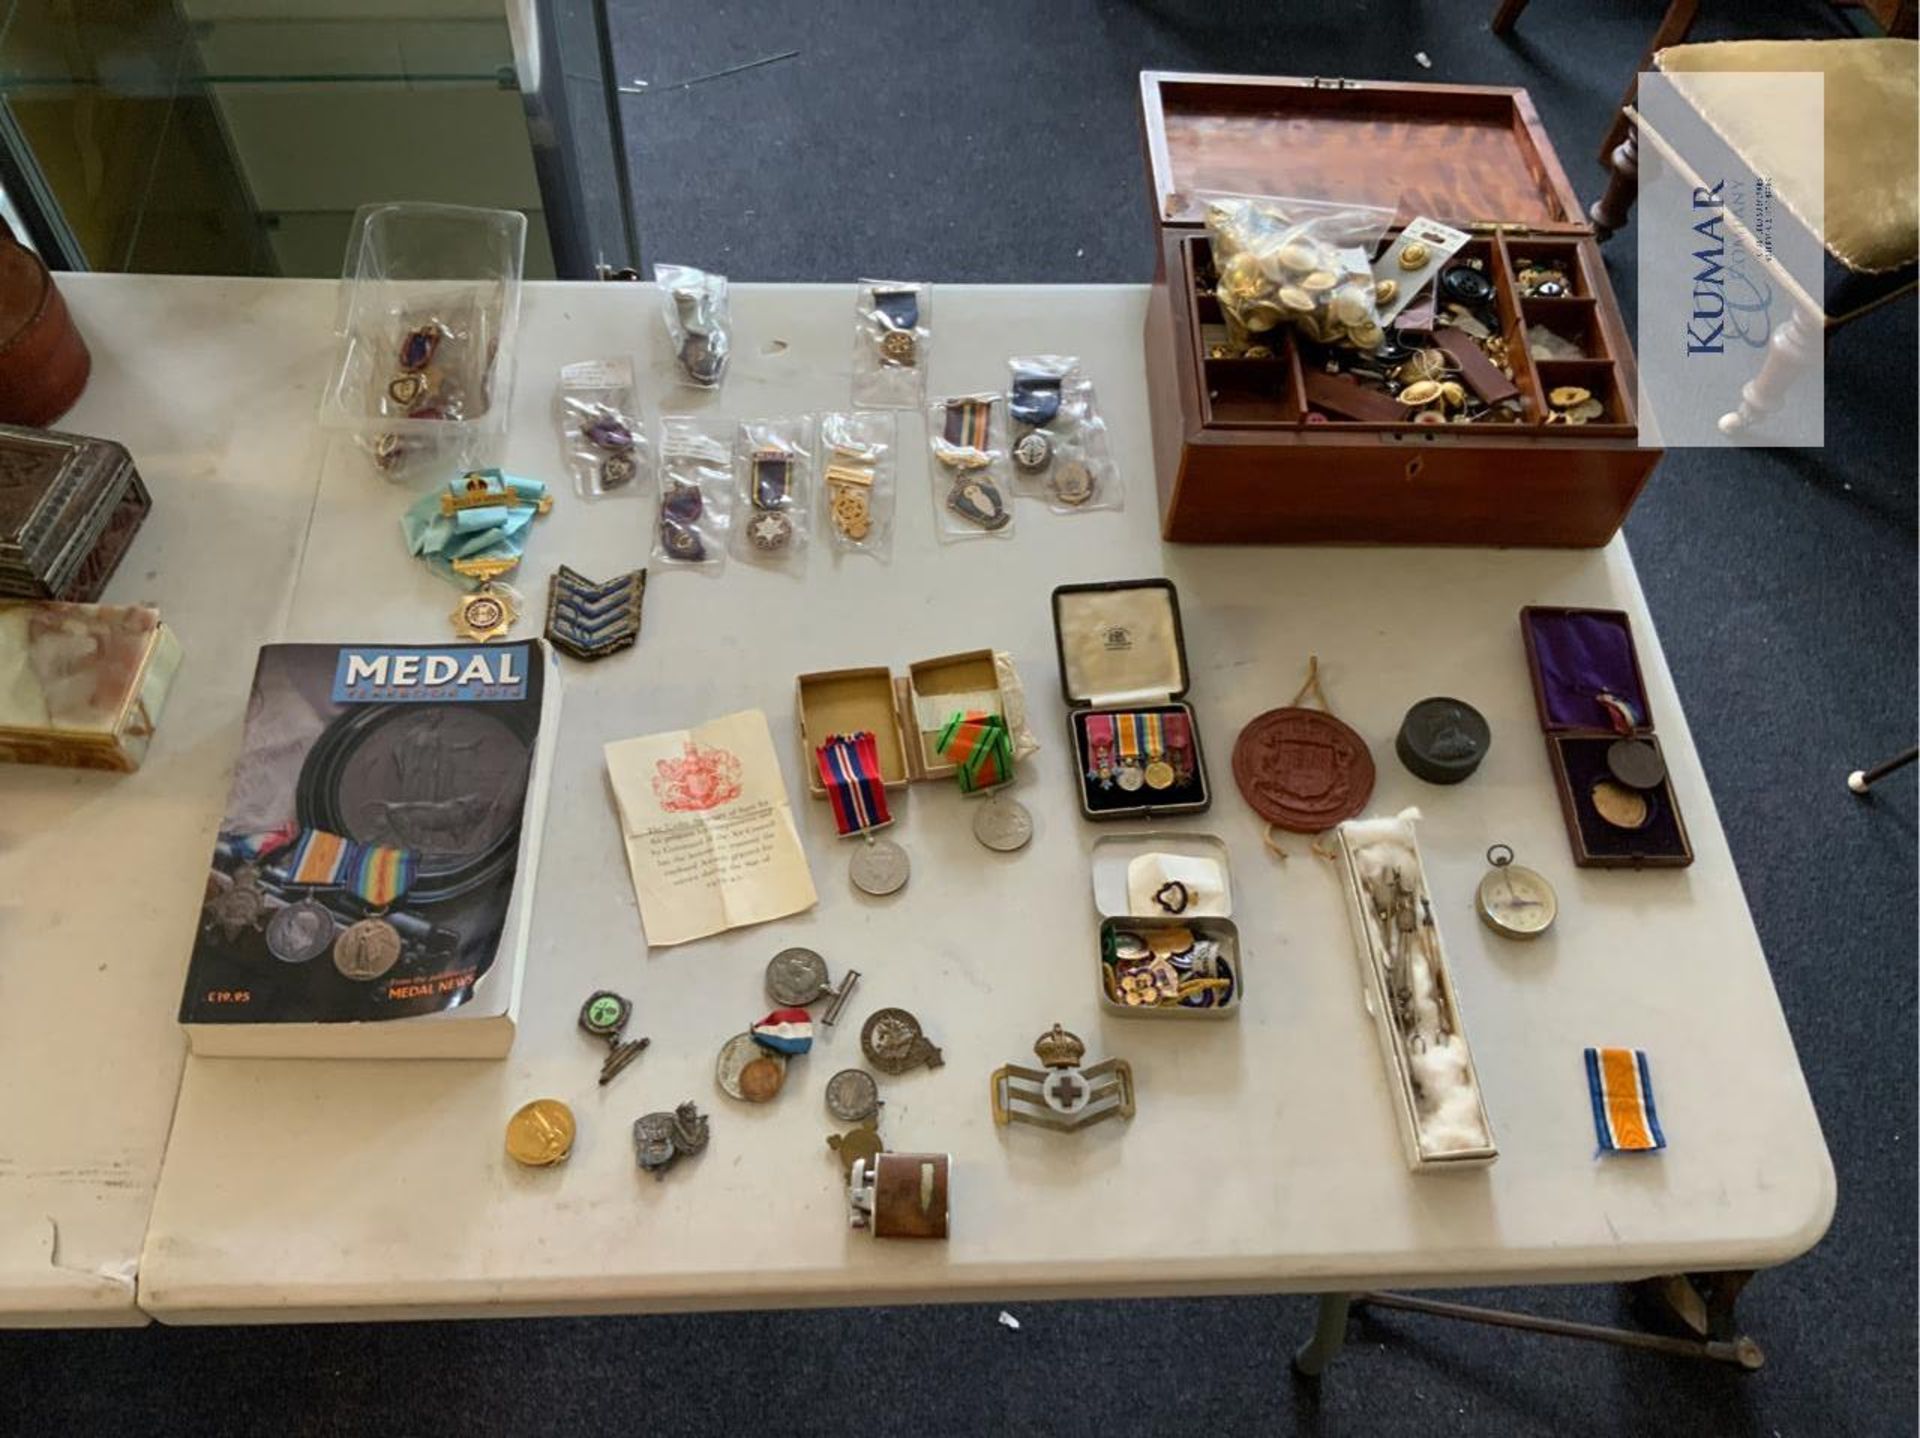 Mixed Lot of Service & Military Medals, Medal Year Book, Vintage Buttons, Wooden Jewellery Box